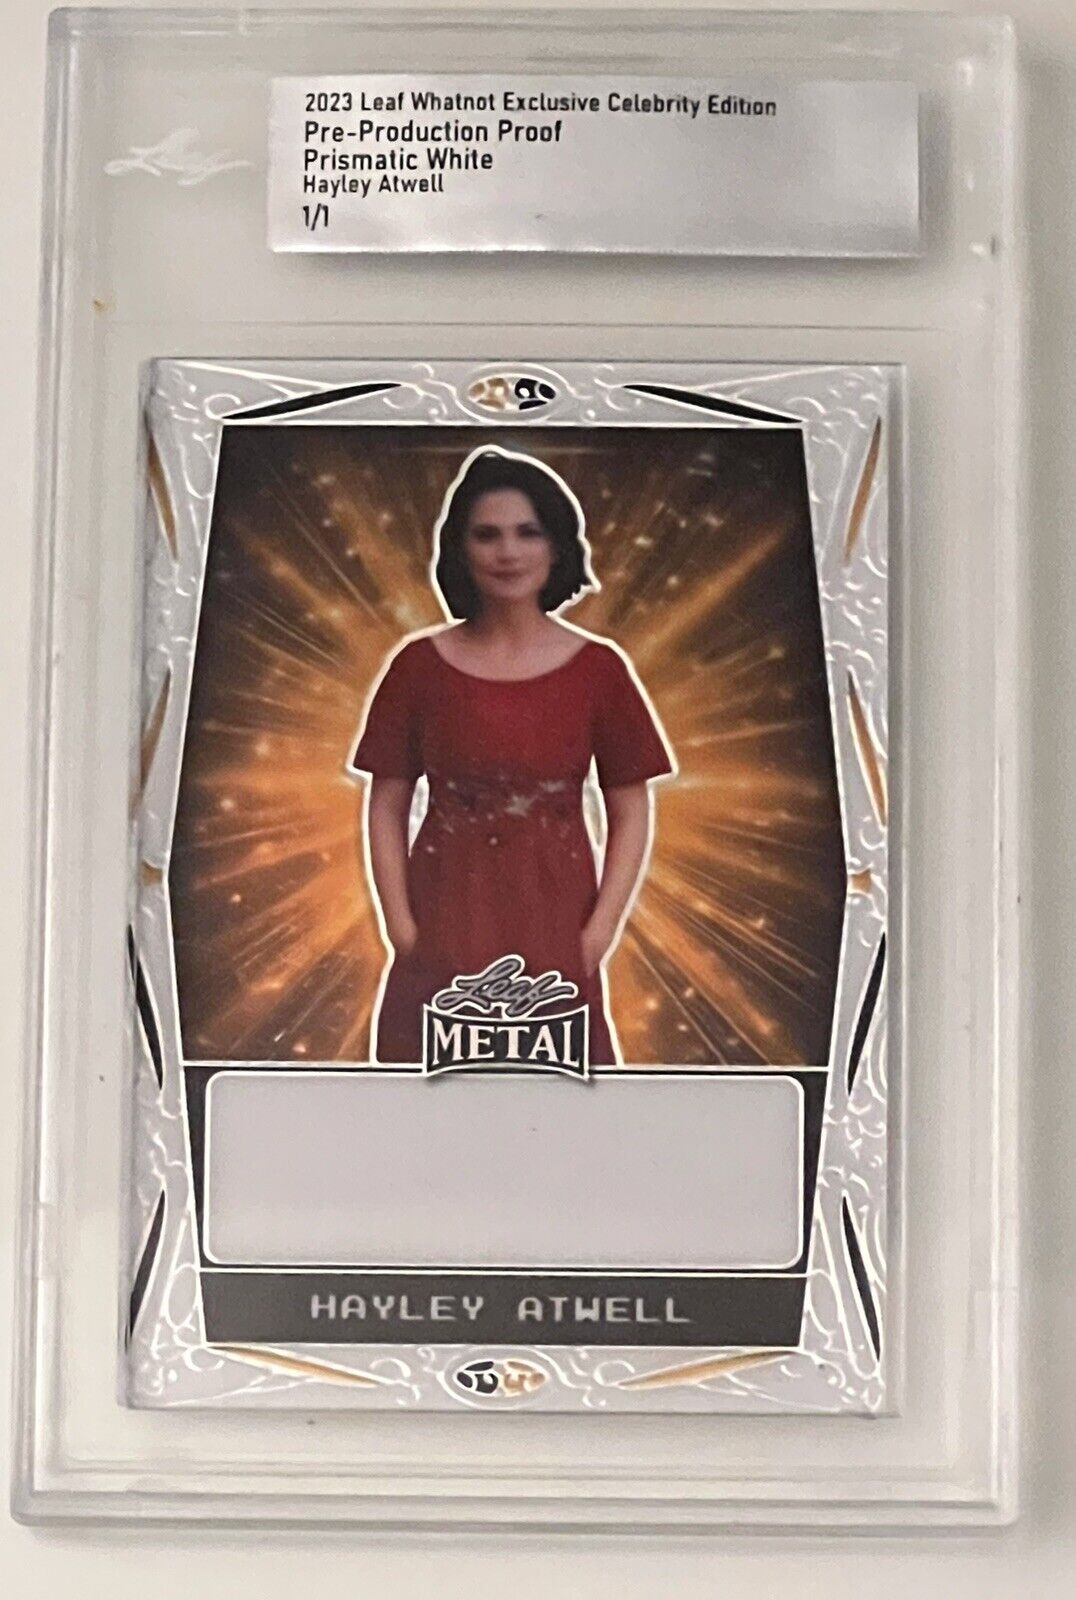 2023 Leaf Whatnot Exclusive Celebrity Edition Hayley Atwell Prismatic White 1/1